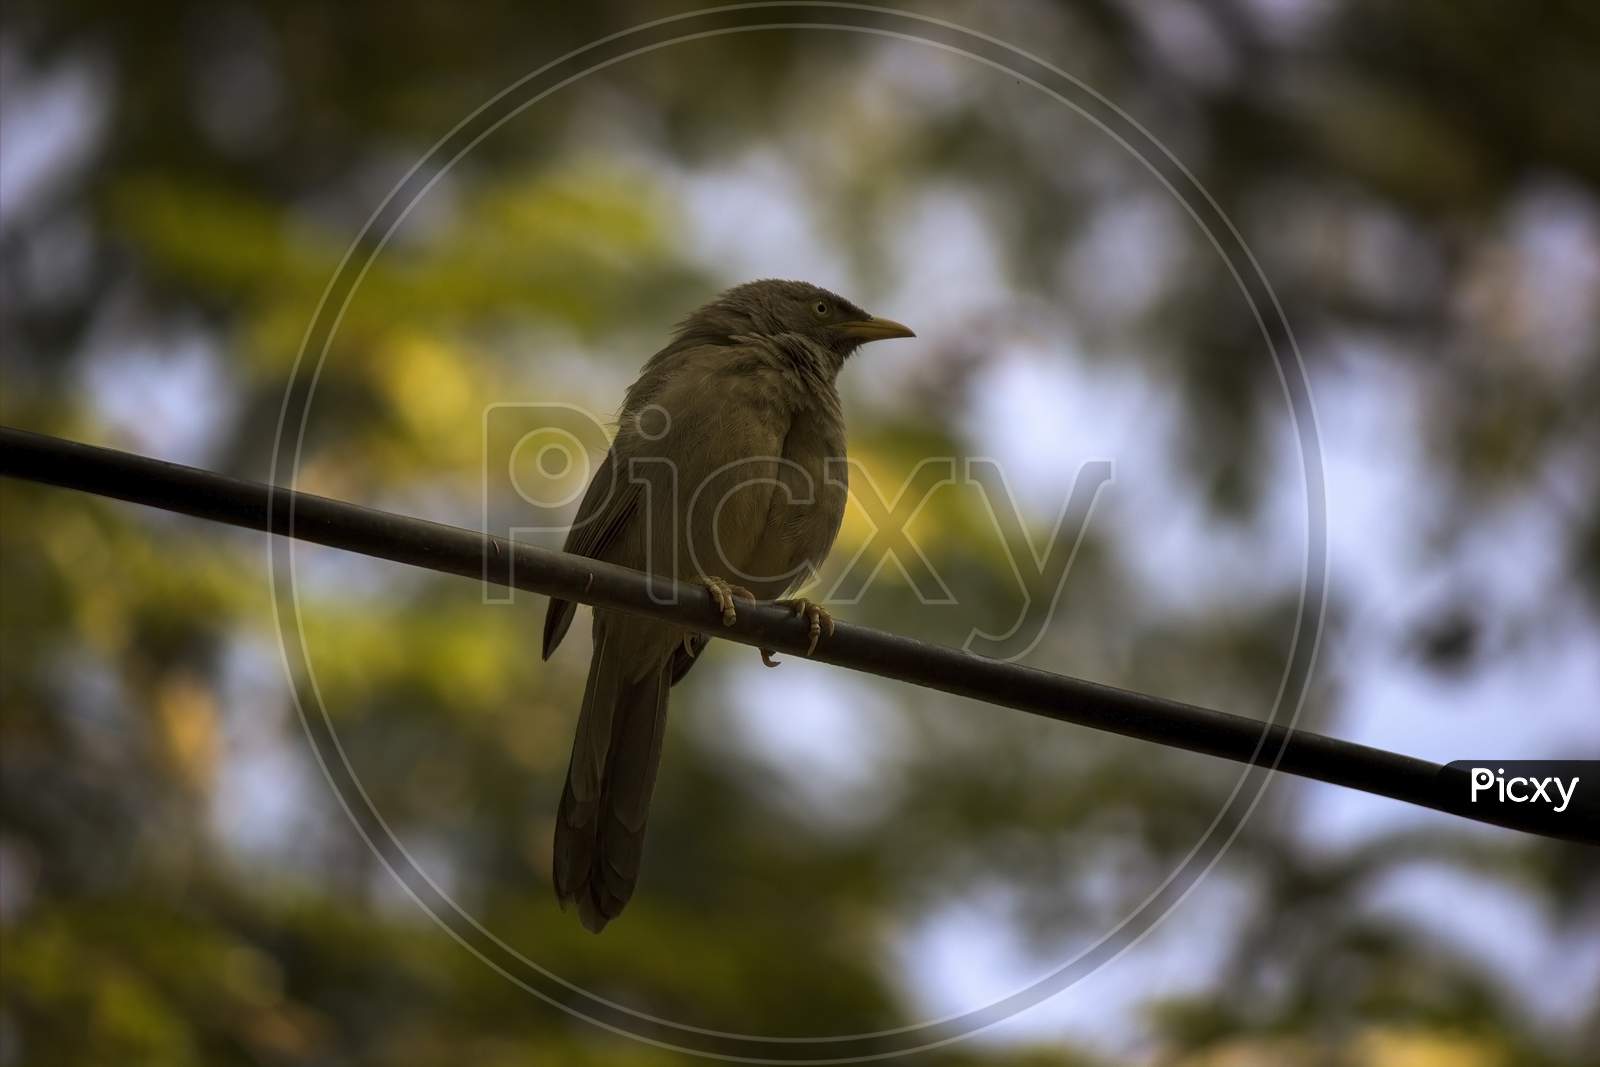 Jungle Babbler A Species Of Laughing Thrushes Also Known As Seven Sisters In Northern India